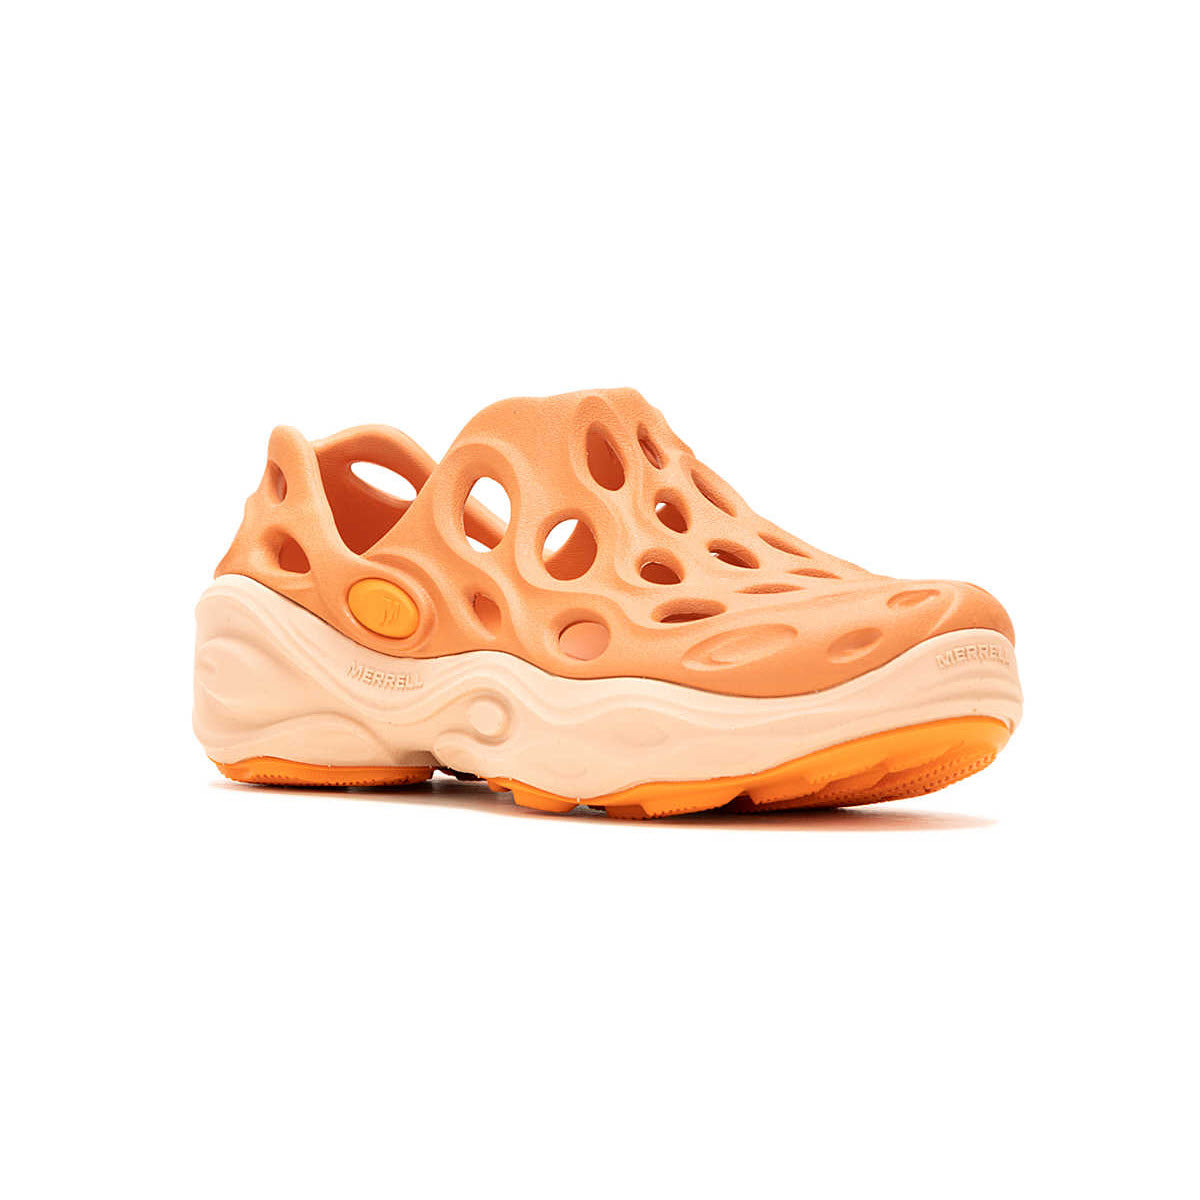 A single melon Merrell Hydro Next Gen Moc with multiple round cutouts and a thick, wavy sole, viewed from the side.